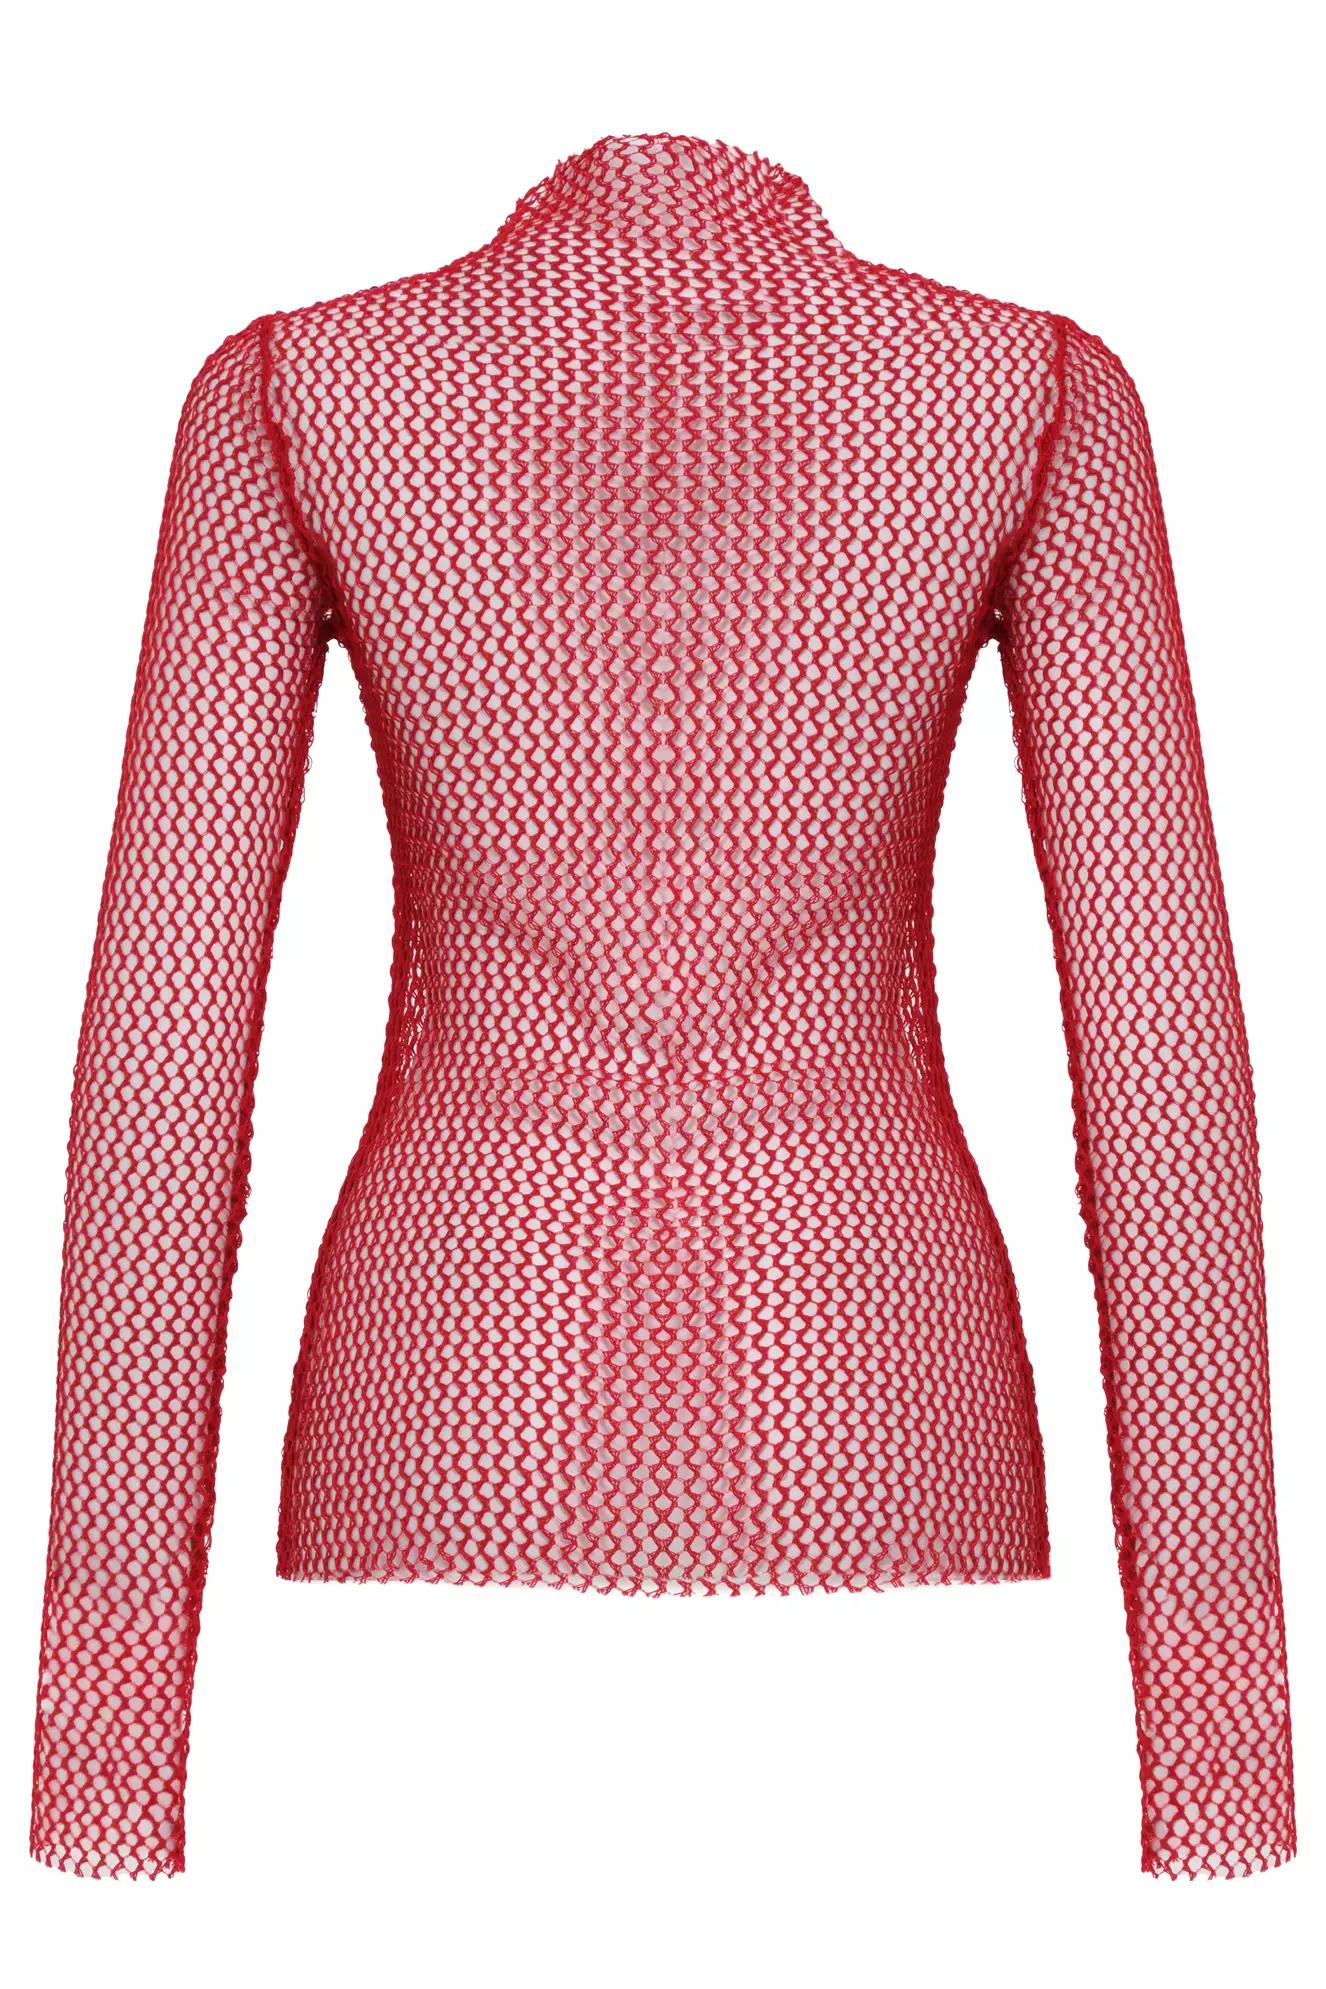 Red file long sleeve shirt